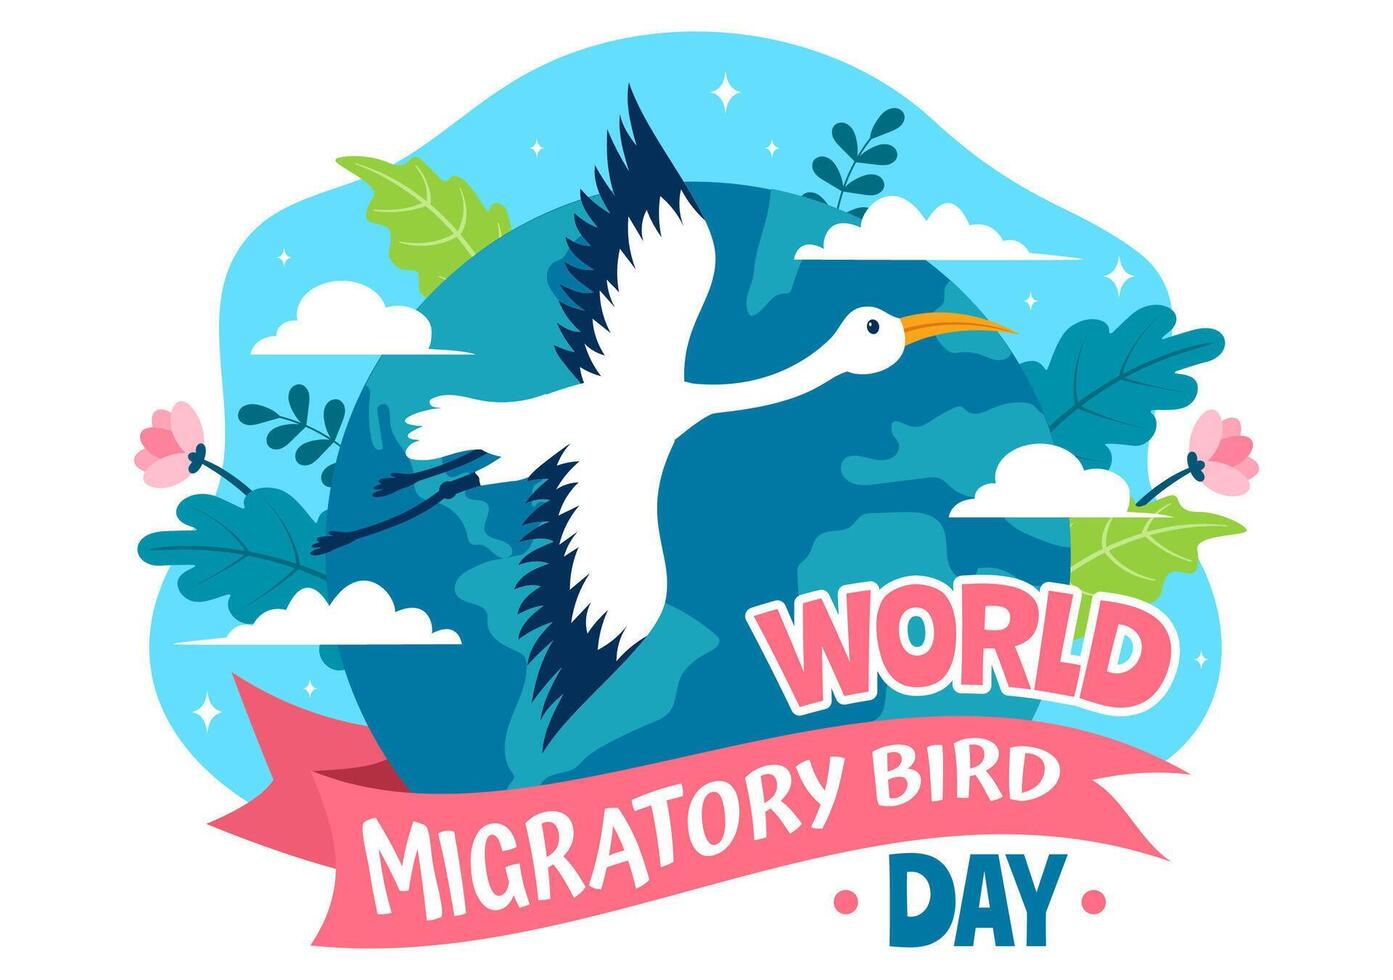 World Migratory Bird Day Vector Illustration with Birds Migrations Groups and Their Habitats for Living Aquatic Ecosystems in Flat Cartoon Background